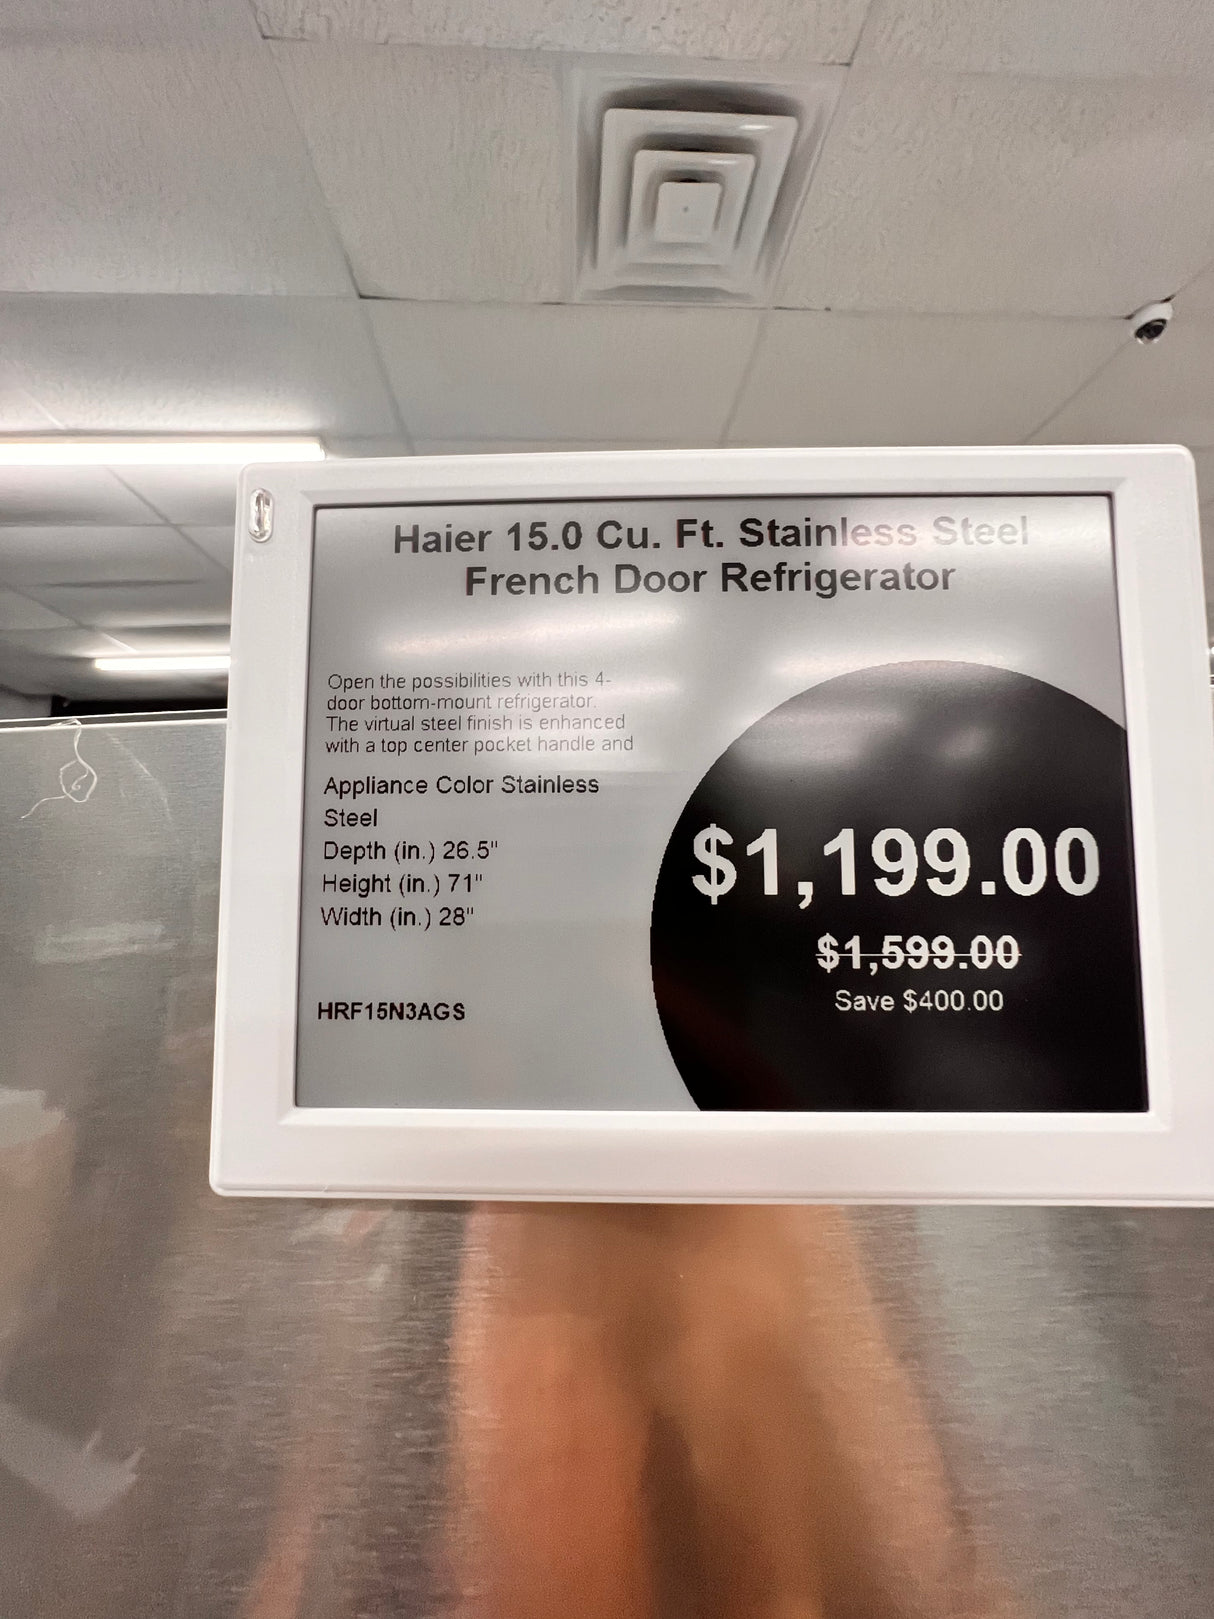 HAIER 15.0 ft.³ stainless steel French door refrigerator HRF15N3AGS